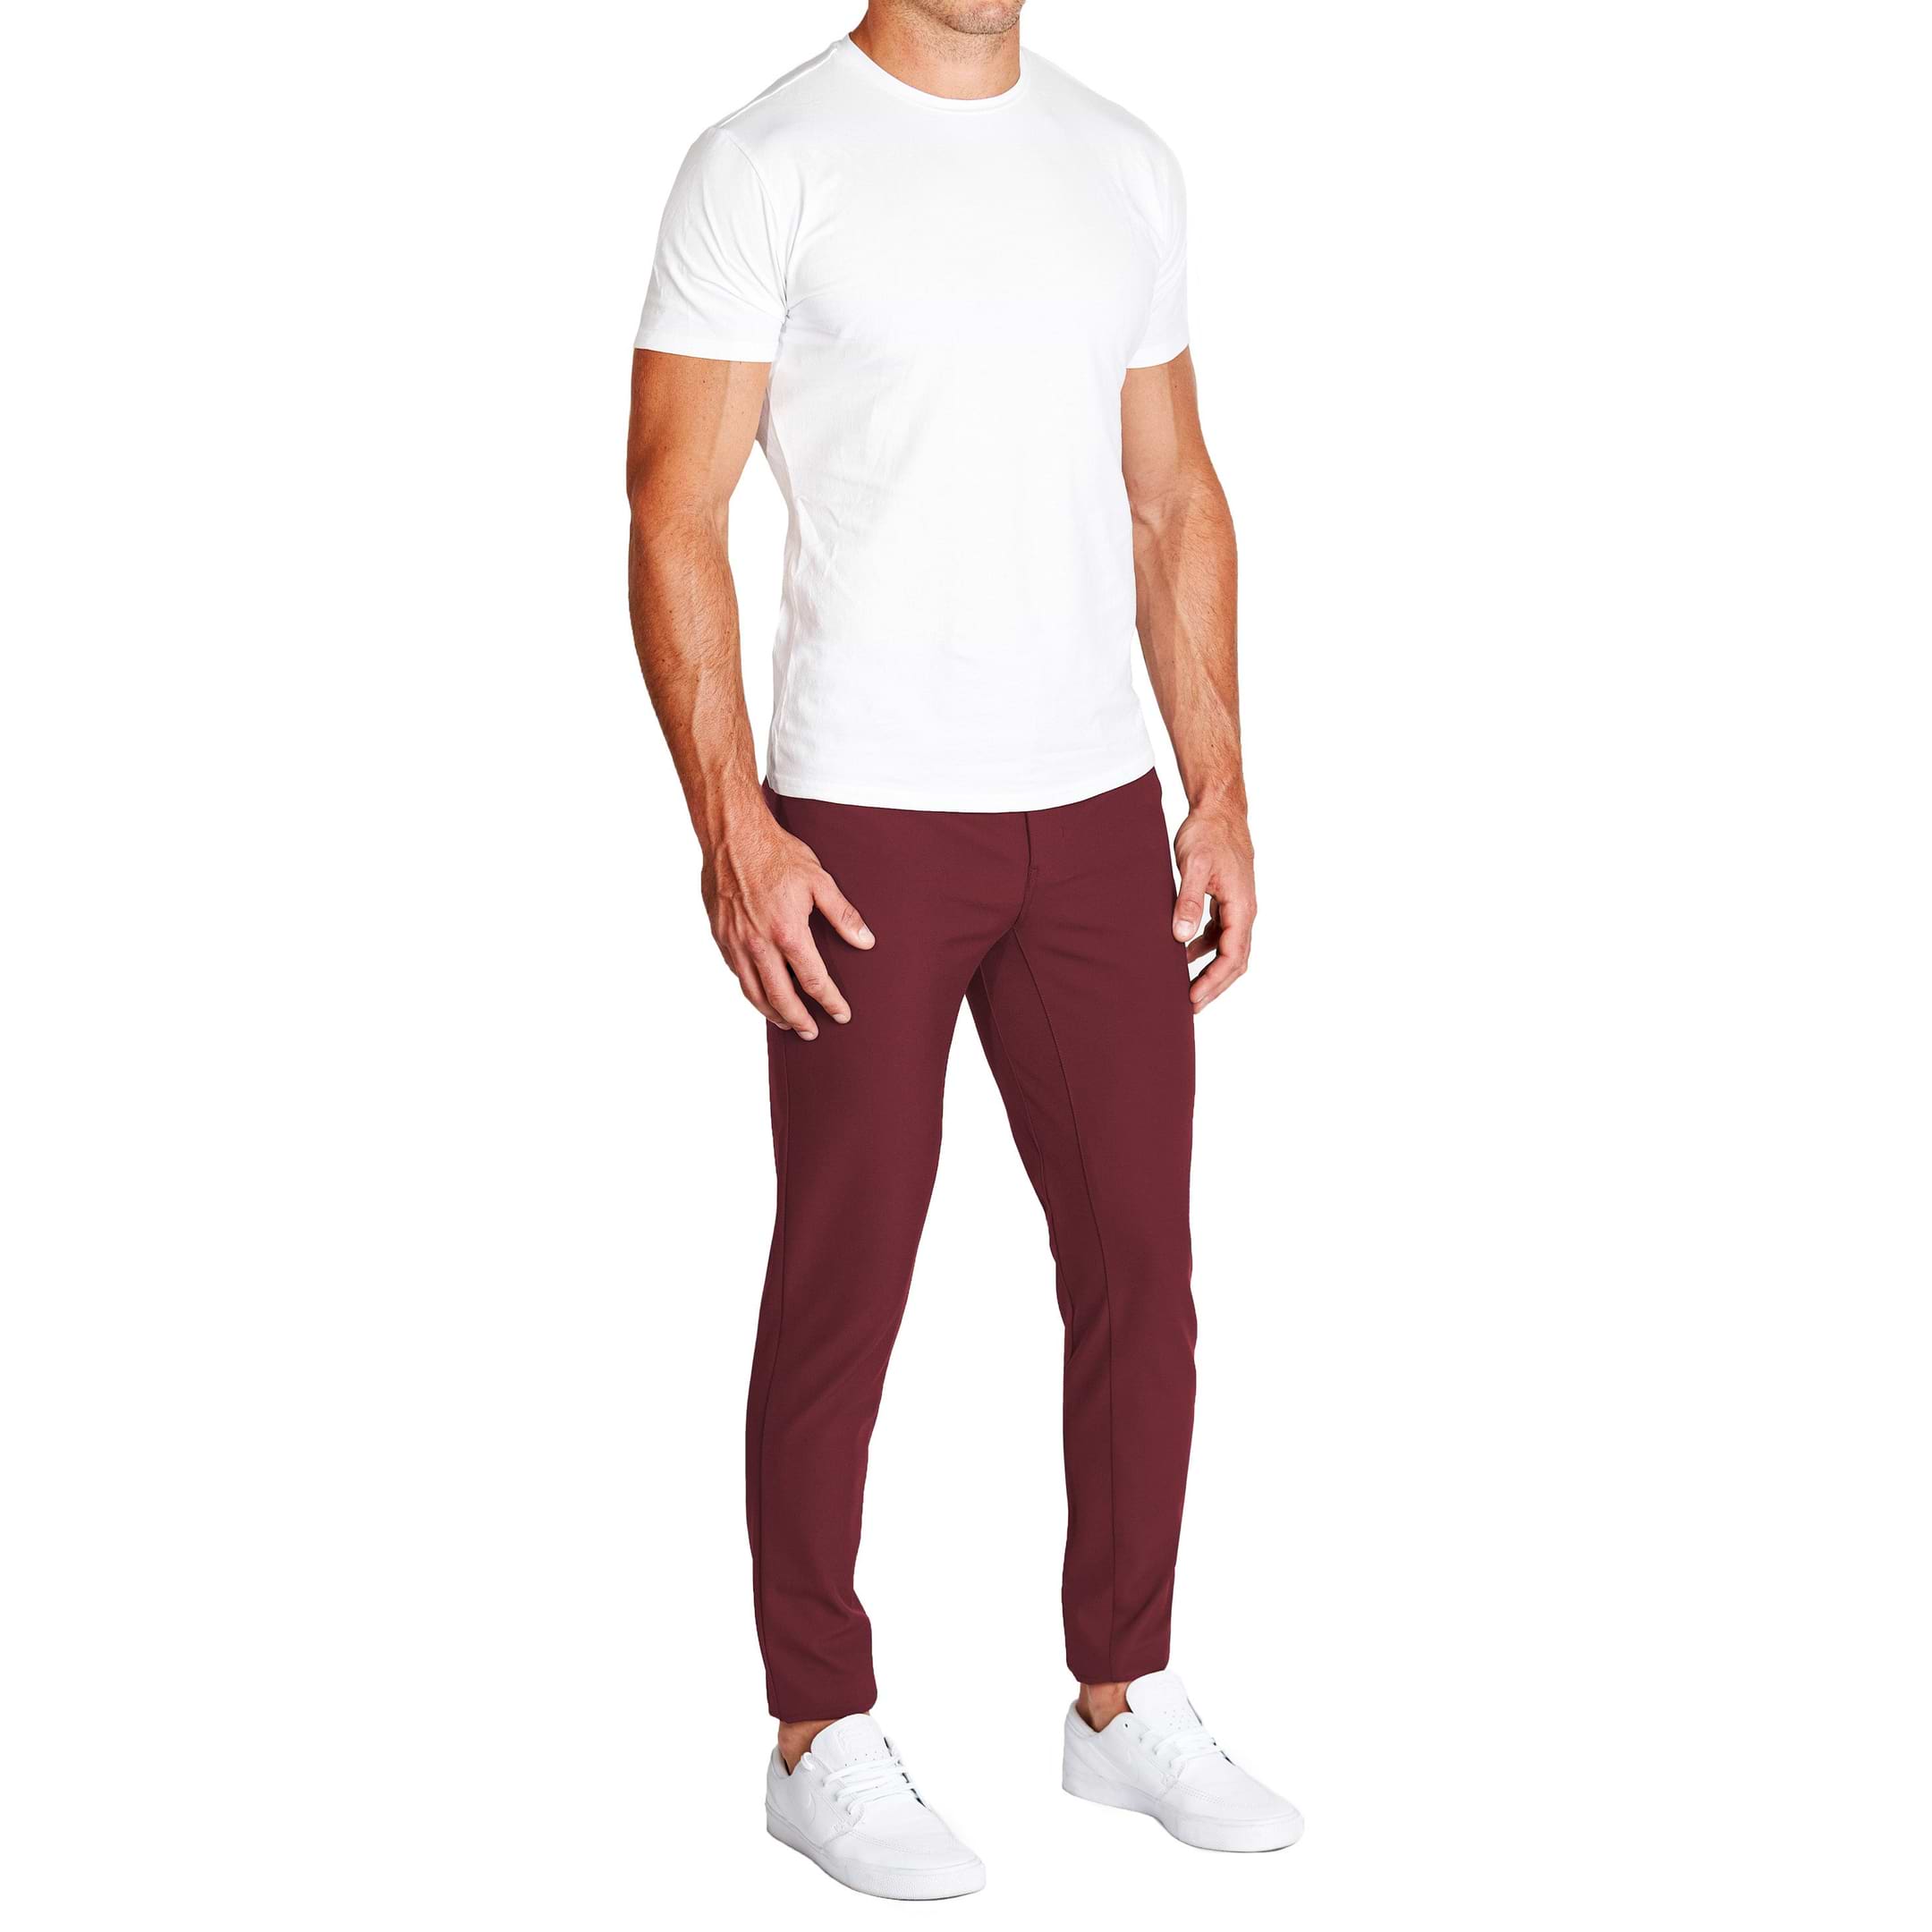 Chino trousers with belt Color maroon - SINSAY - 9360C-83X